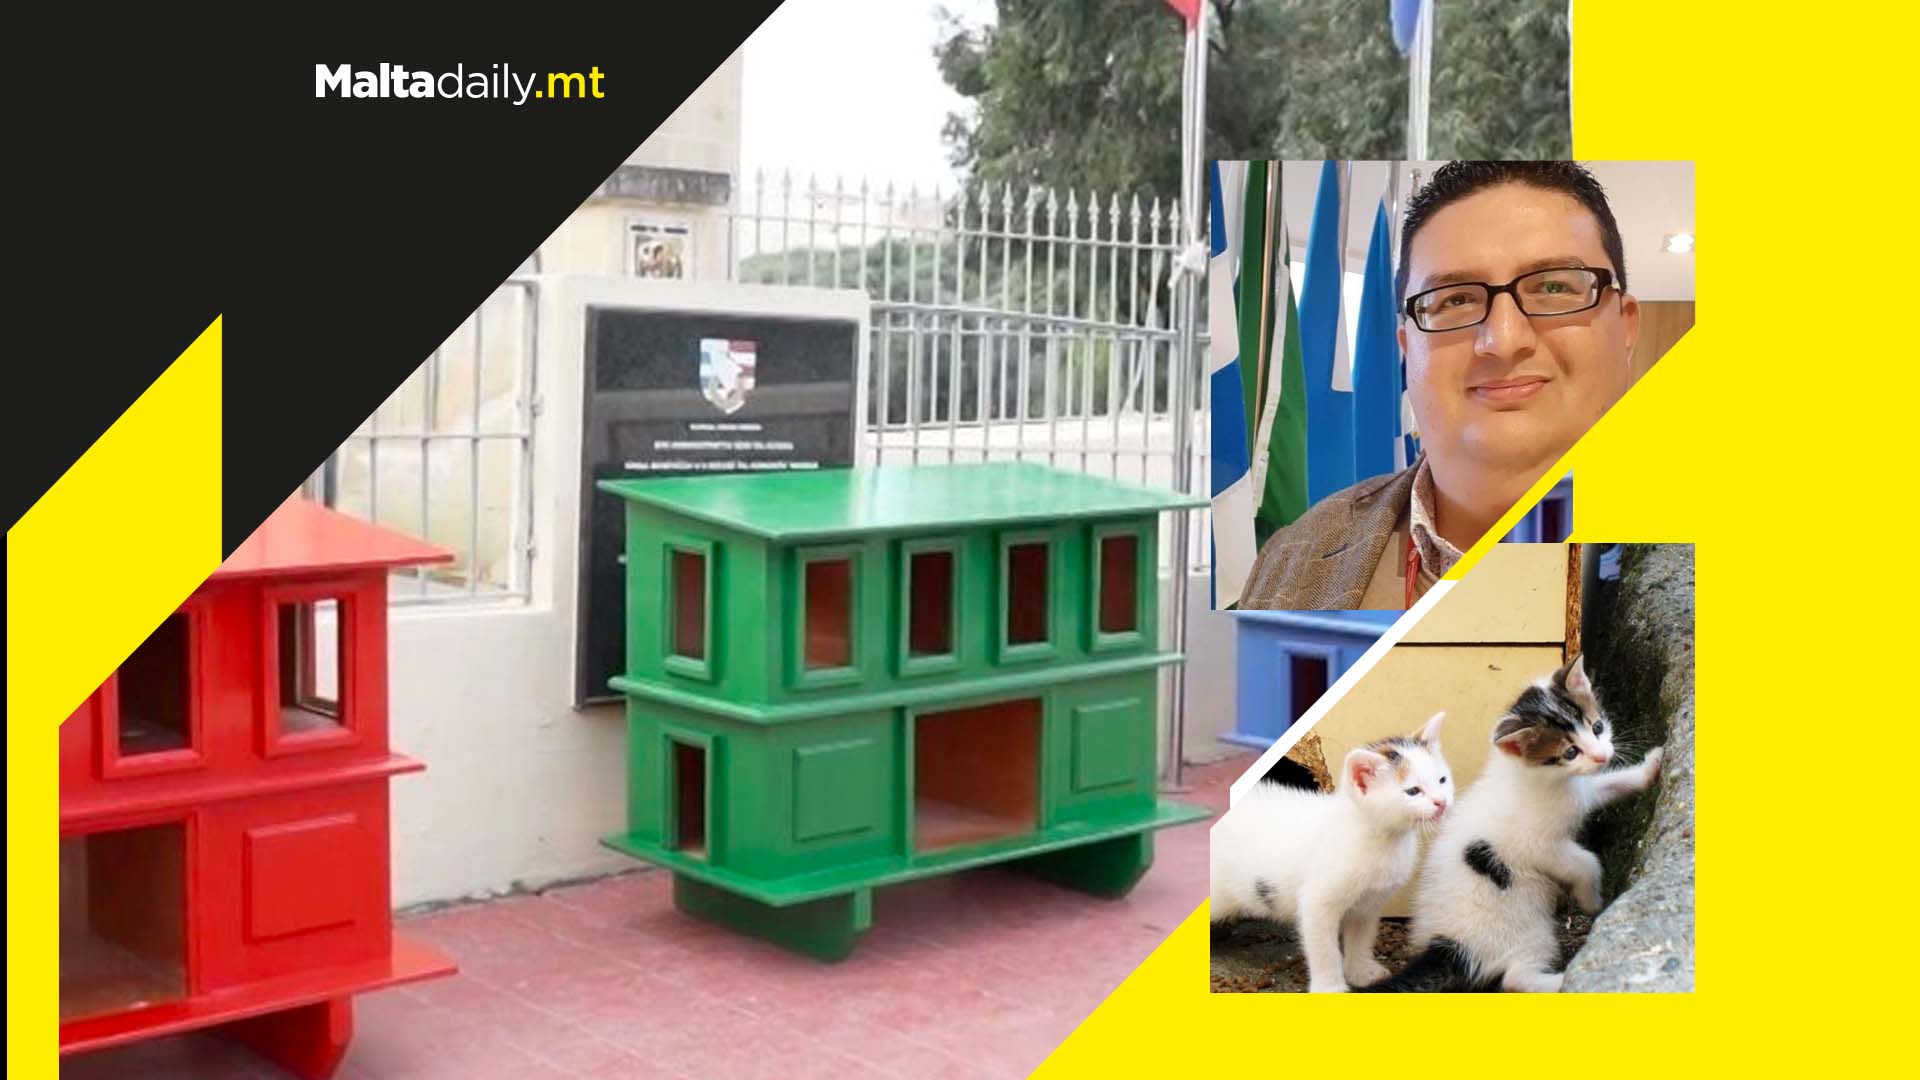 Traditional Maltese balconies to serve as stray cat shelters